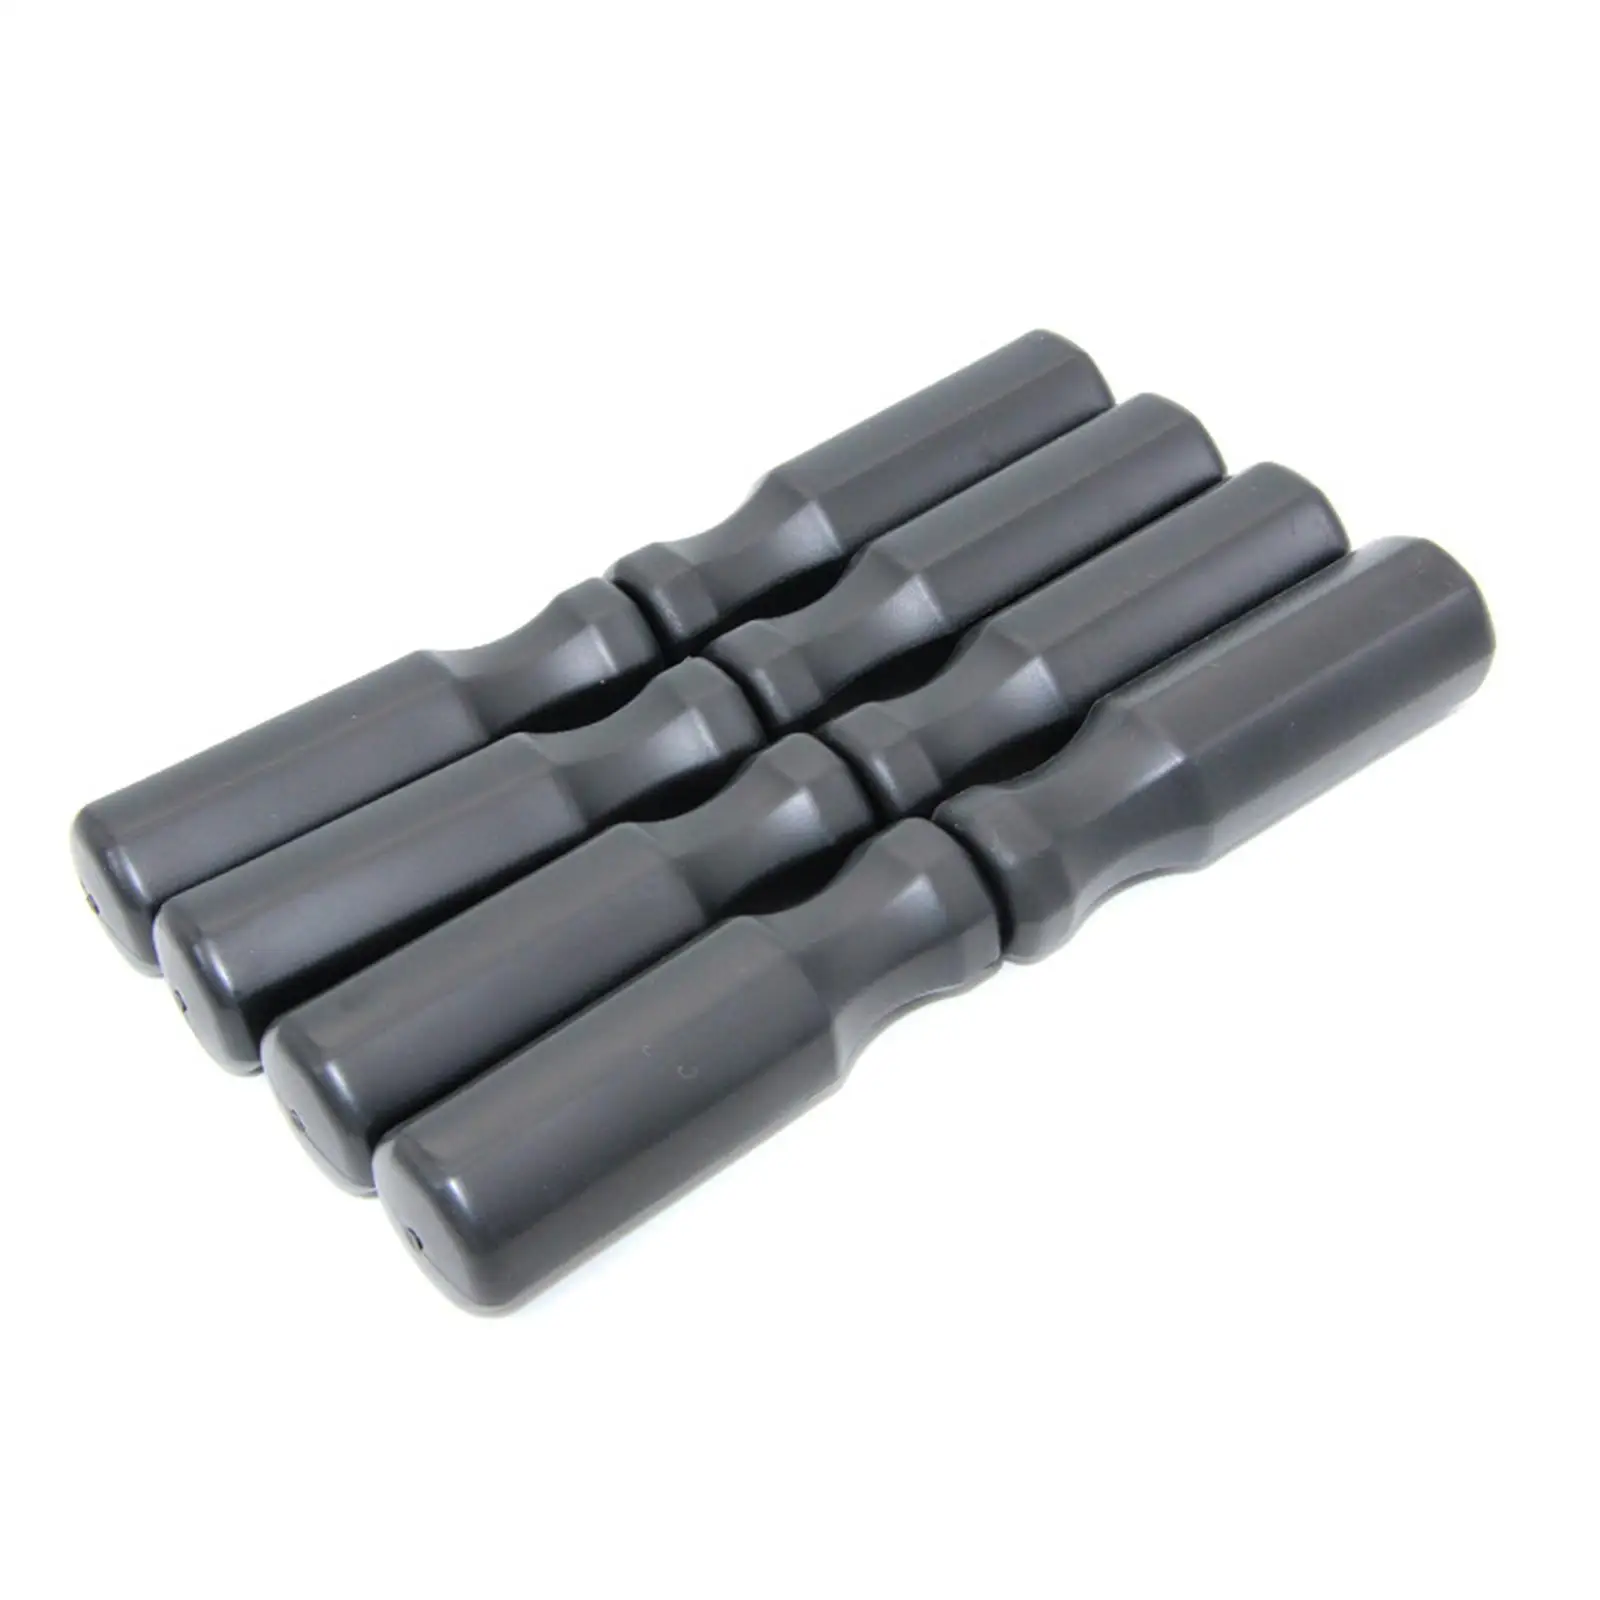 8 Pieces Foosball Handle Grip, Lightweight Portable Easy Install, Practical